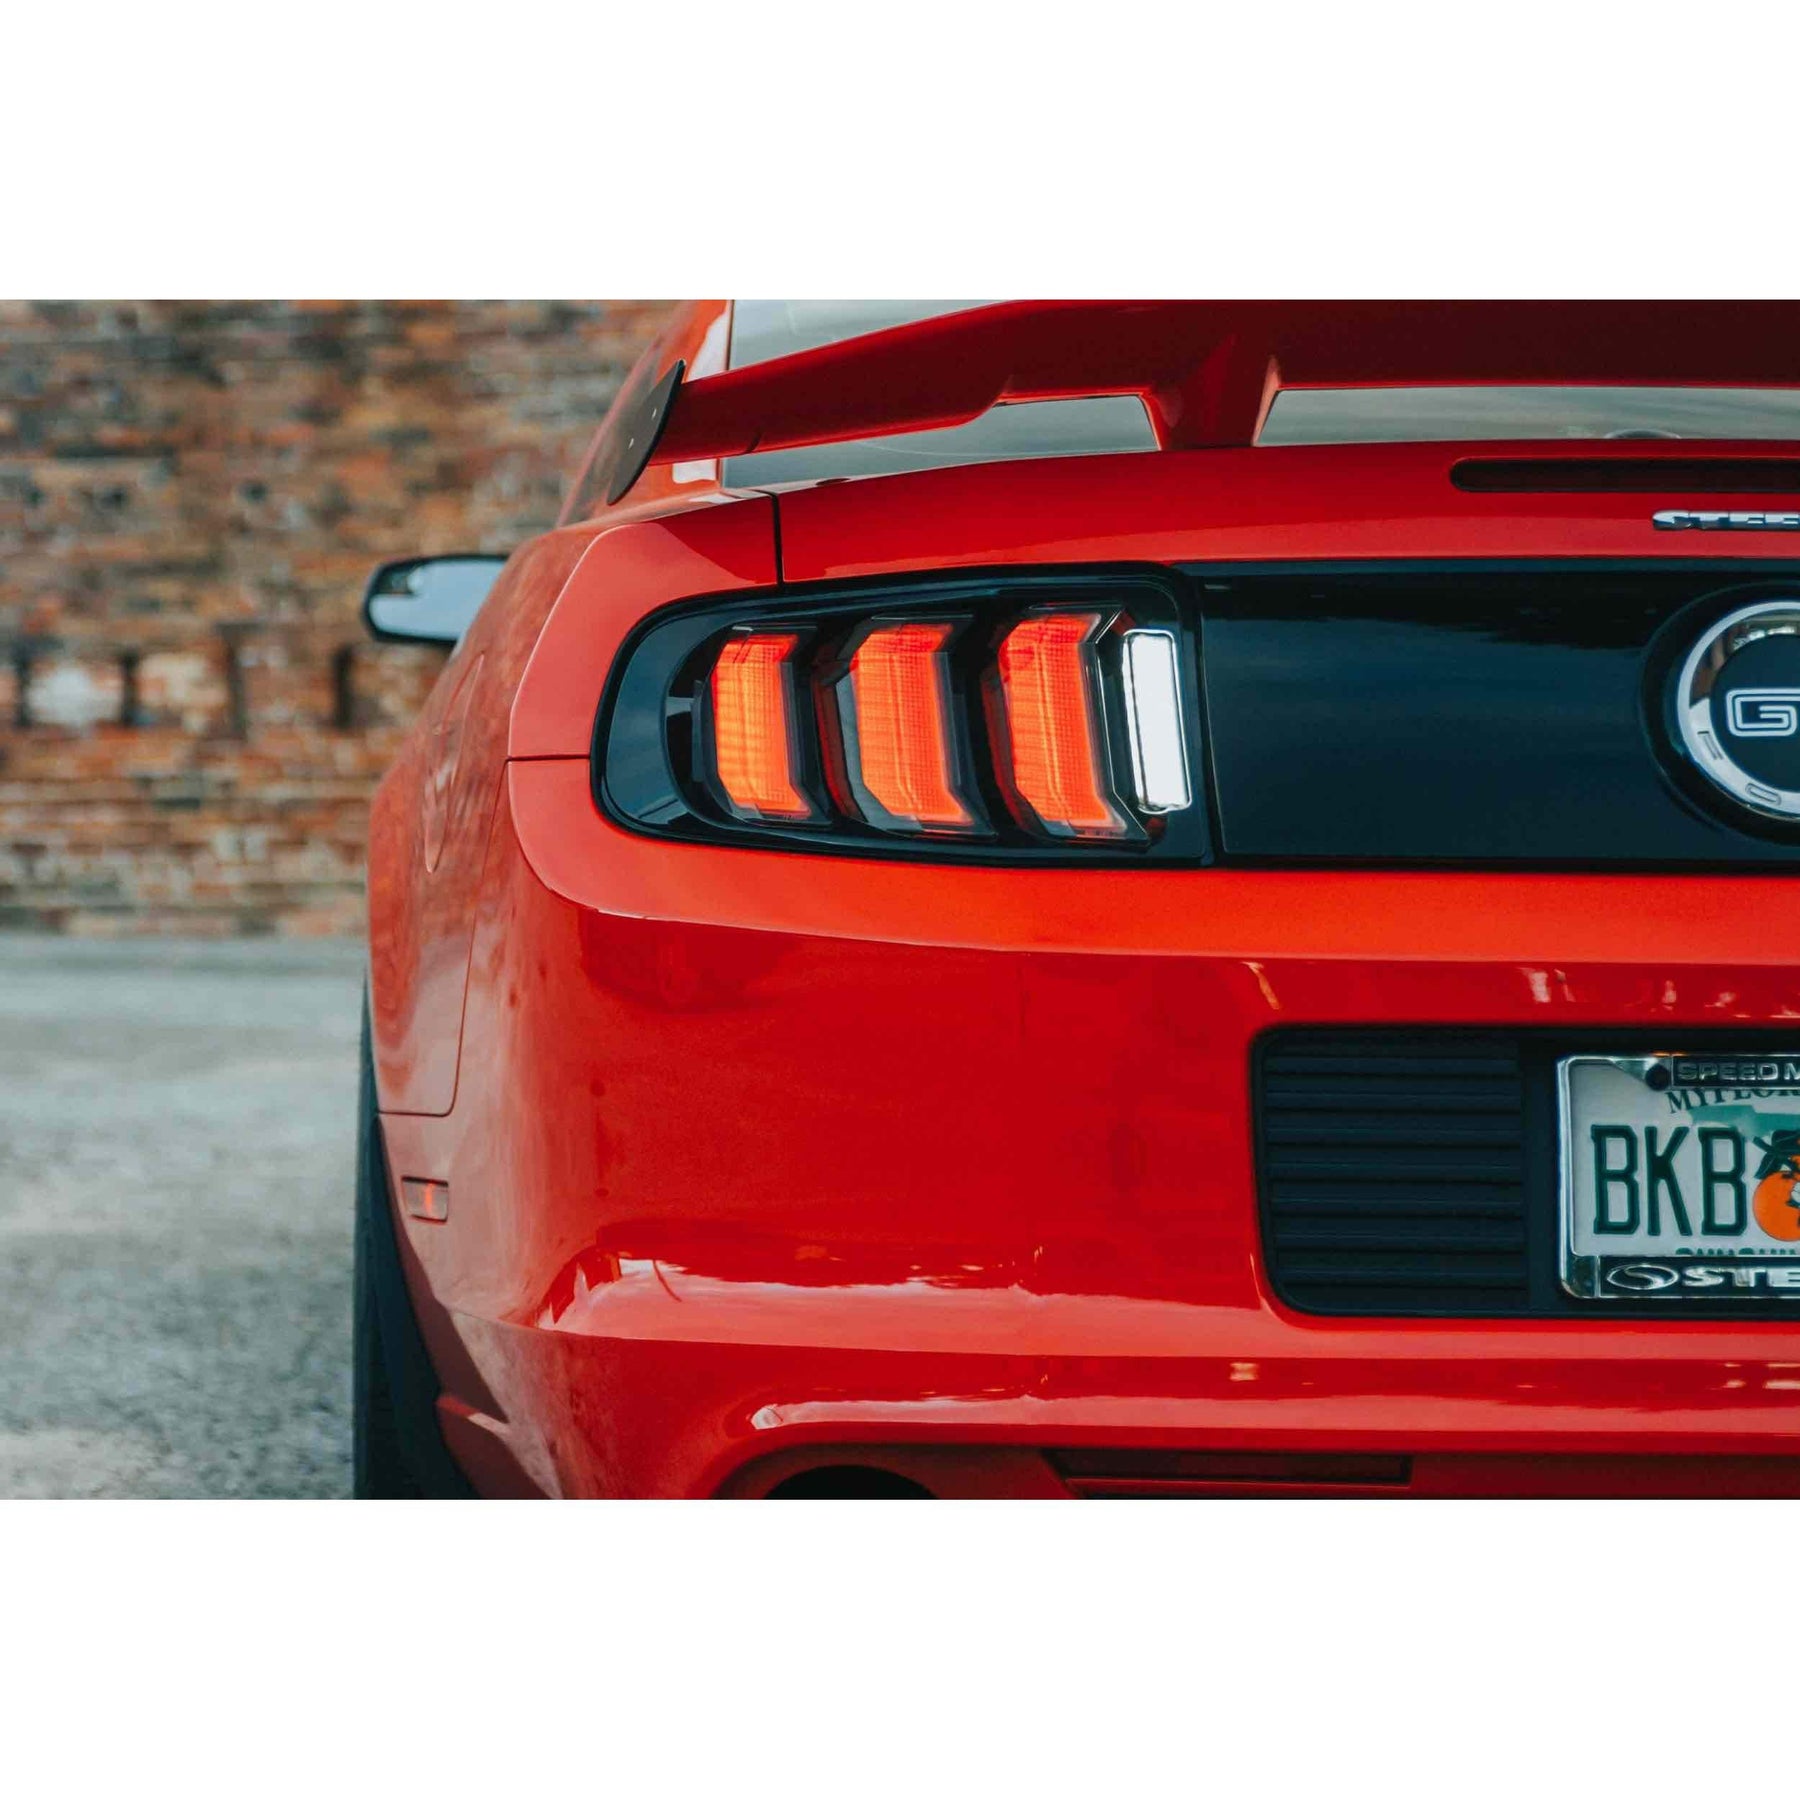 2013-2014 Mustang XB LED Smoked Tail Lights (LF422.2)-Tail Lights-Morimoto-Dirty Diesel Customs